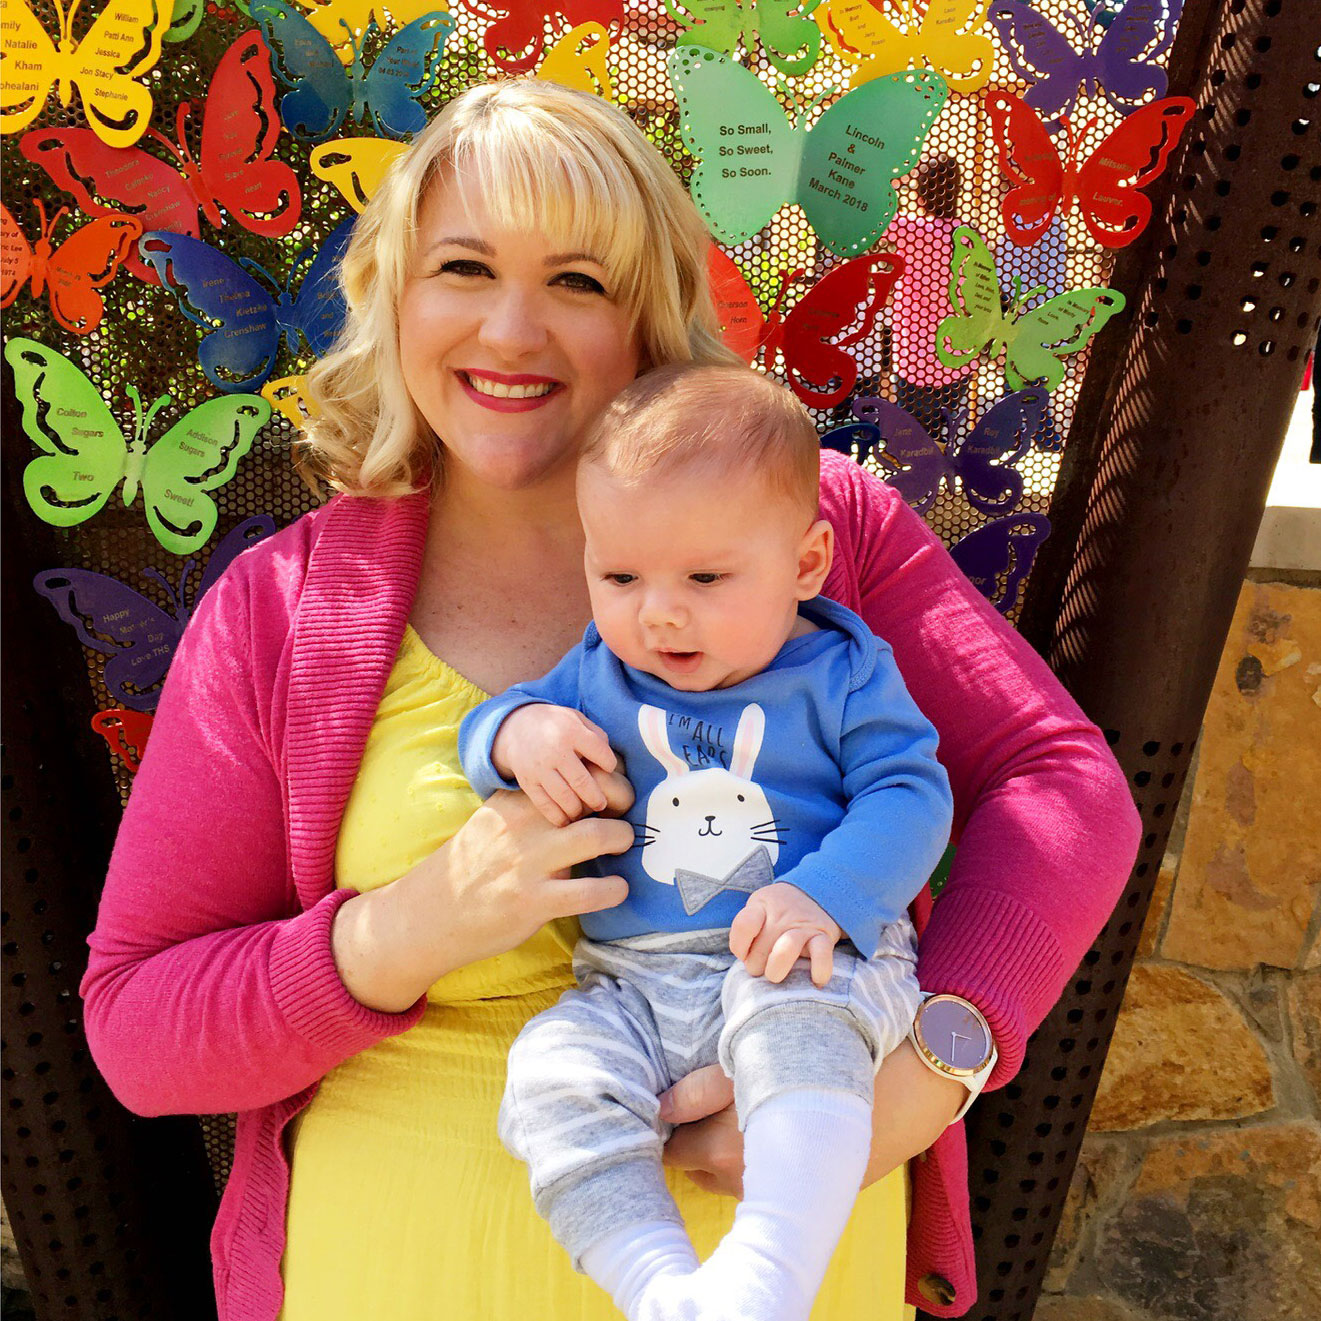 Becoming a single mom using IVF with donor eggs